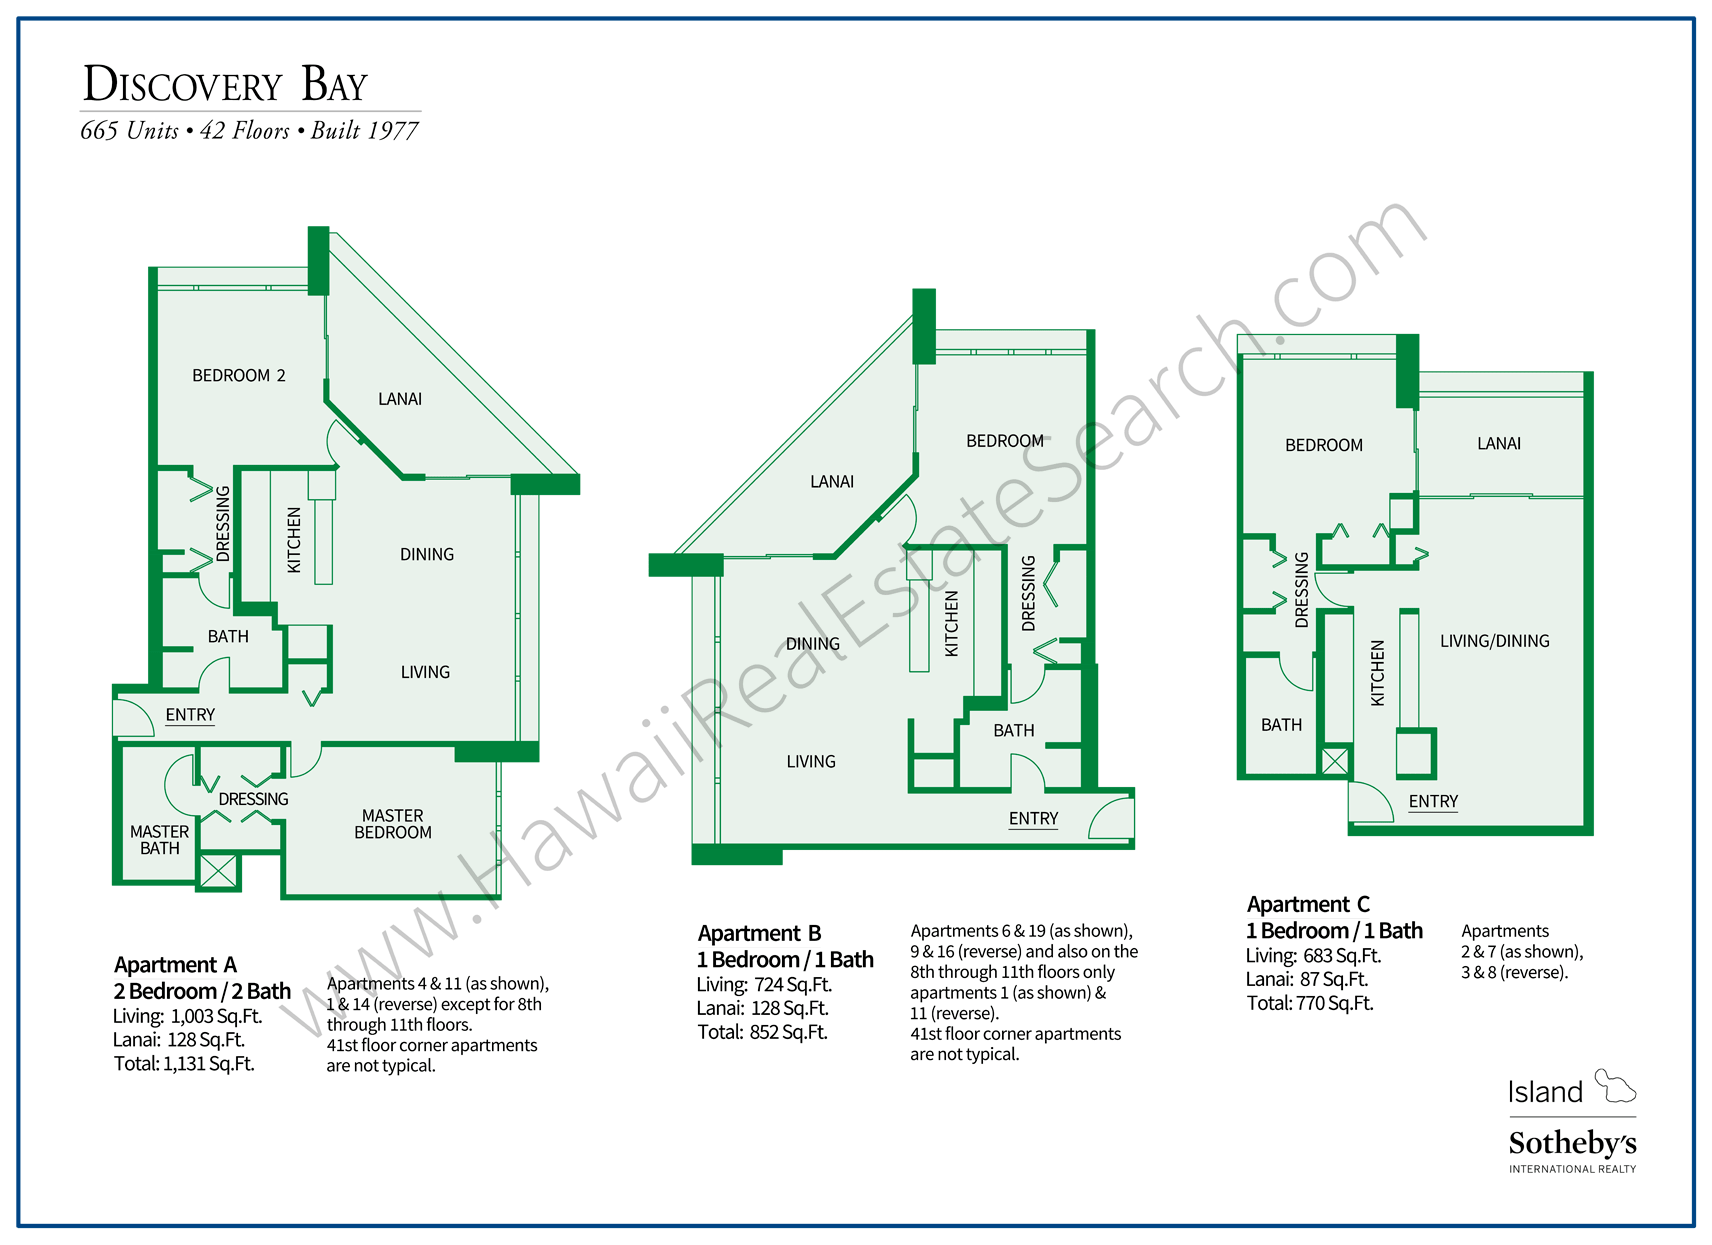 Discovery Bay Floor Plans